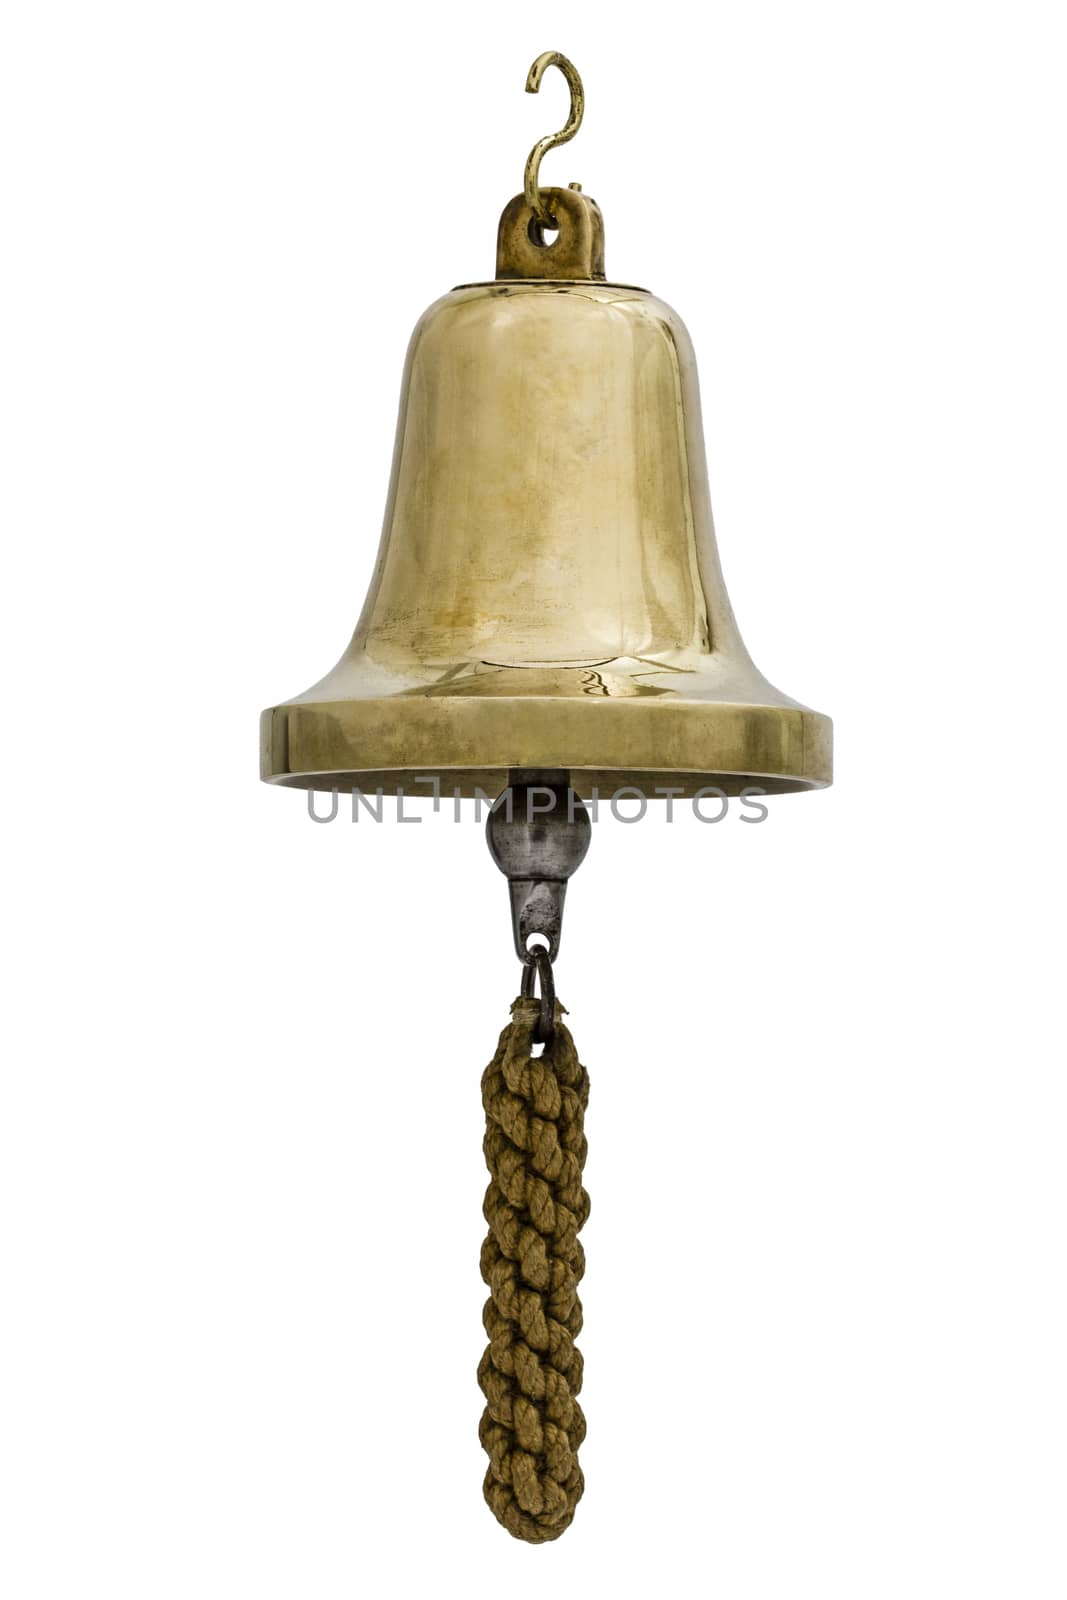 Brass bell, isolated on white background by kostiuchenko